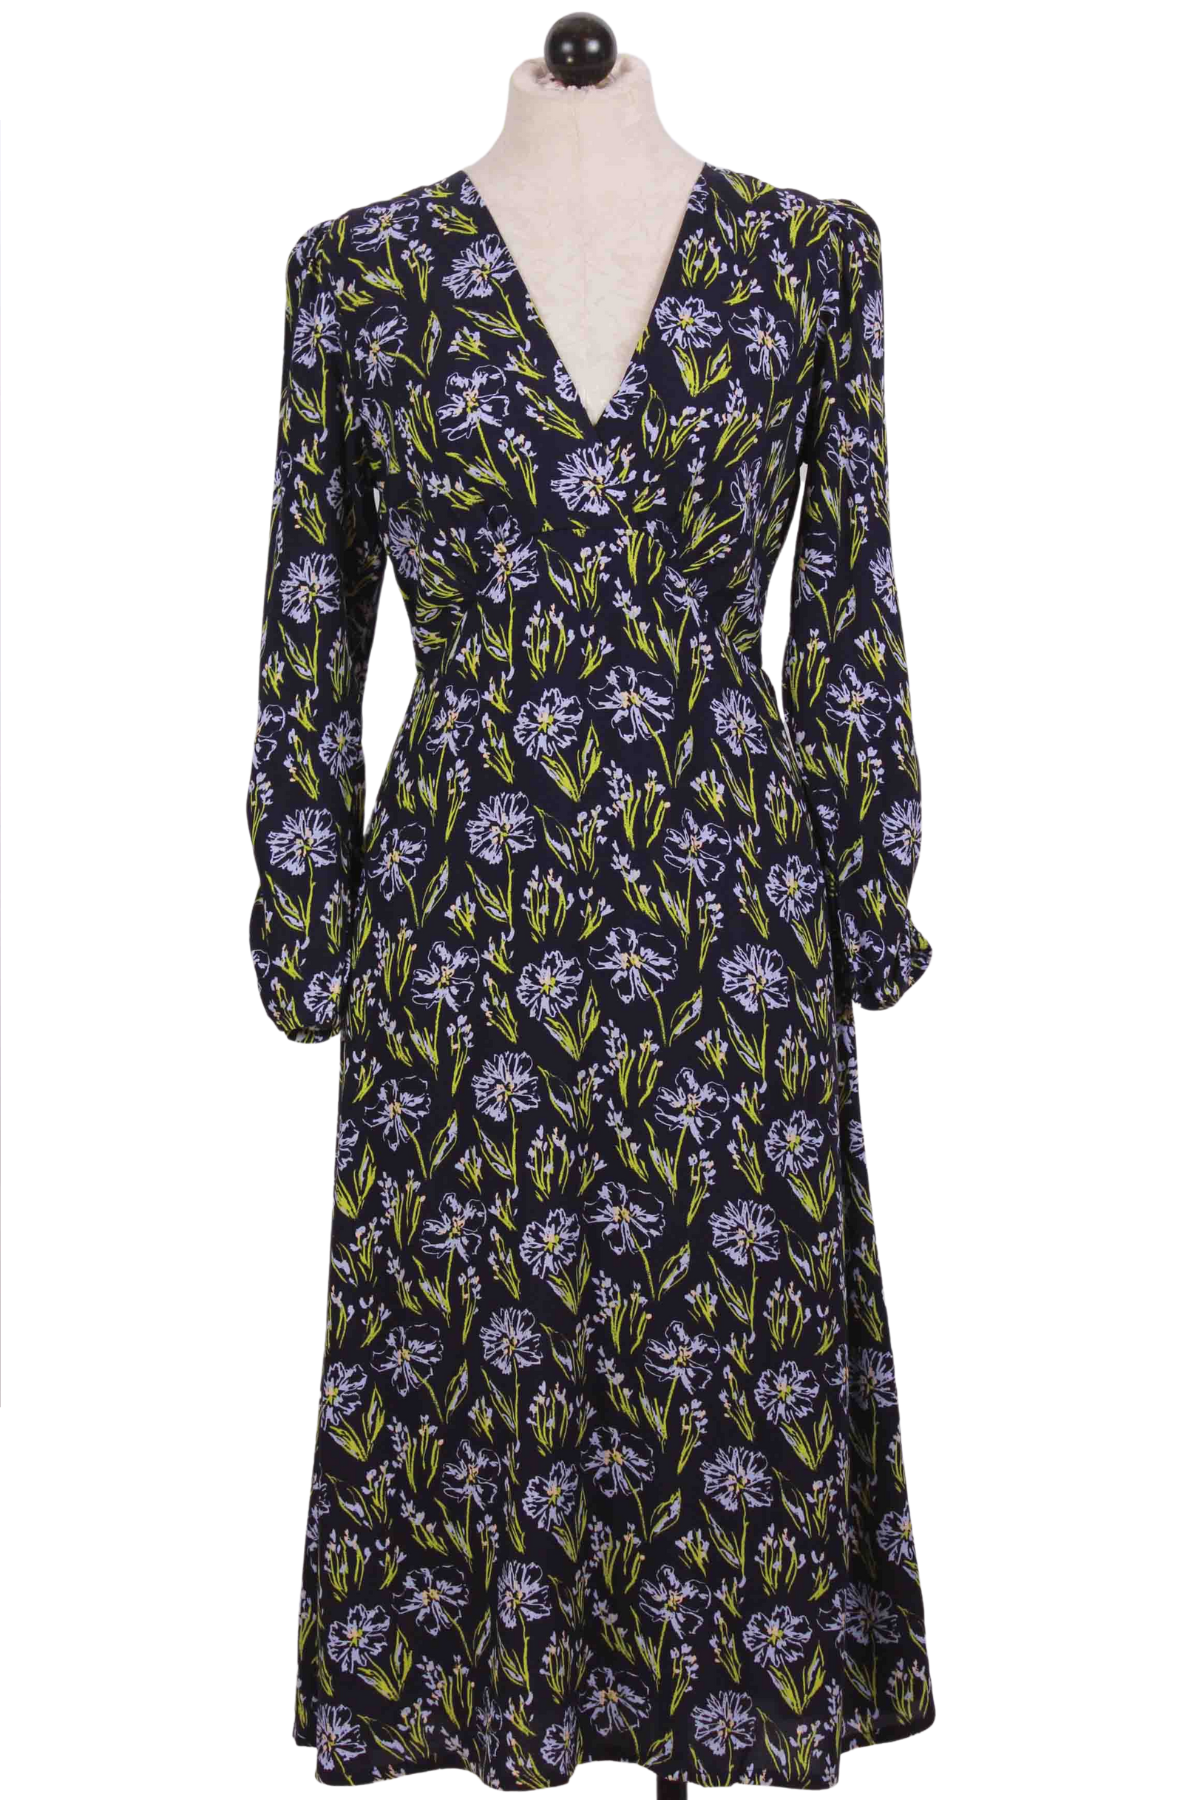 Long Sleeve Floral Ruched Sleeve V Neck Dress by Compania Fantastica